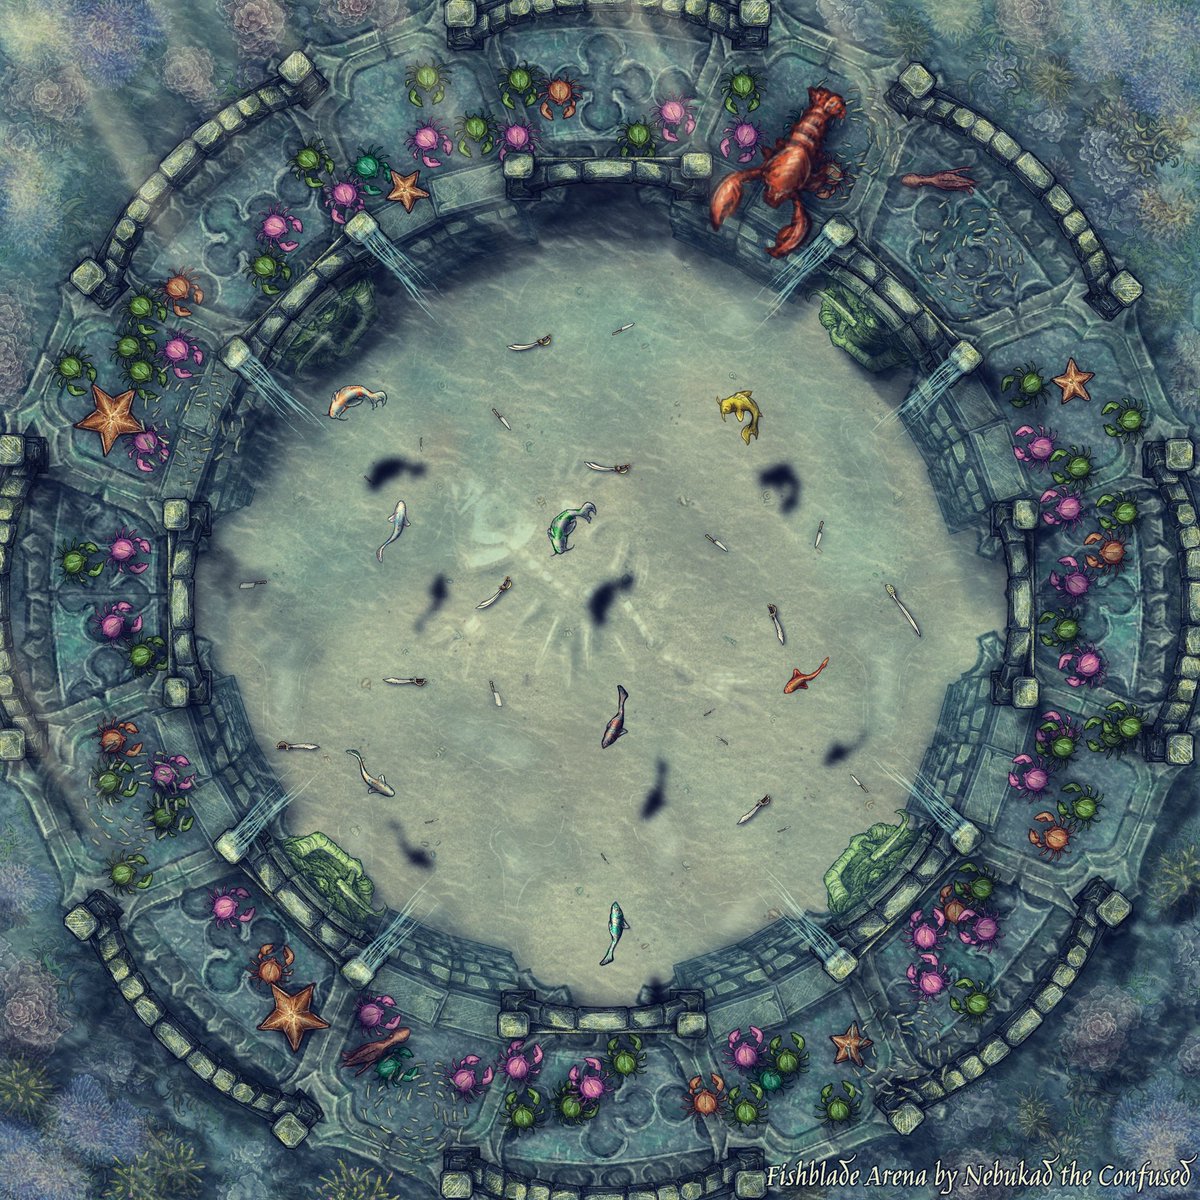 New #Mapdrop! 

You didn't ask for it! Until yesterday you didn't even know you needed it!
And here I made it for you!

The ultimate #FishBlade Arena!!!

A free Map to blade up you fishy indi games!!!
#TTRPGs #indigames #Fishblade #battlemap #arenamap #fantasymap #underwatermap